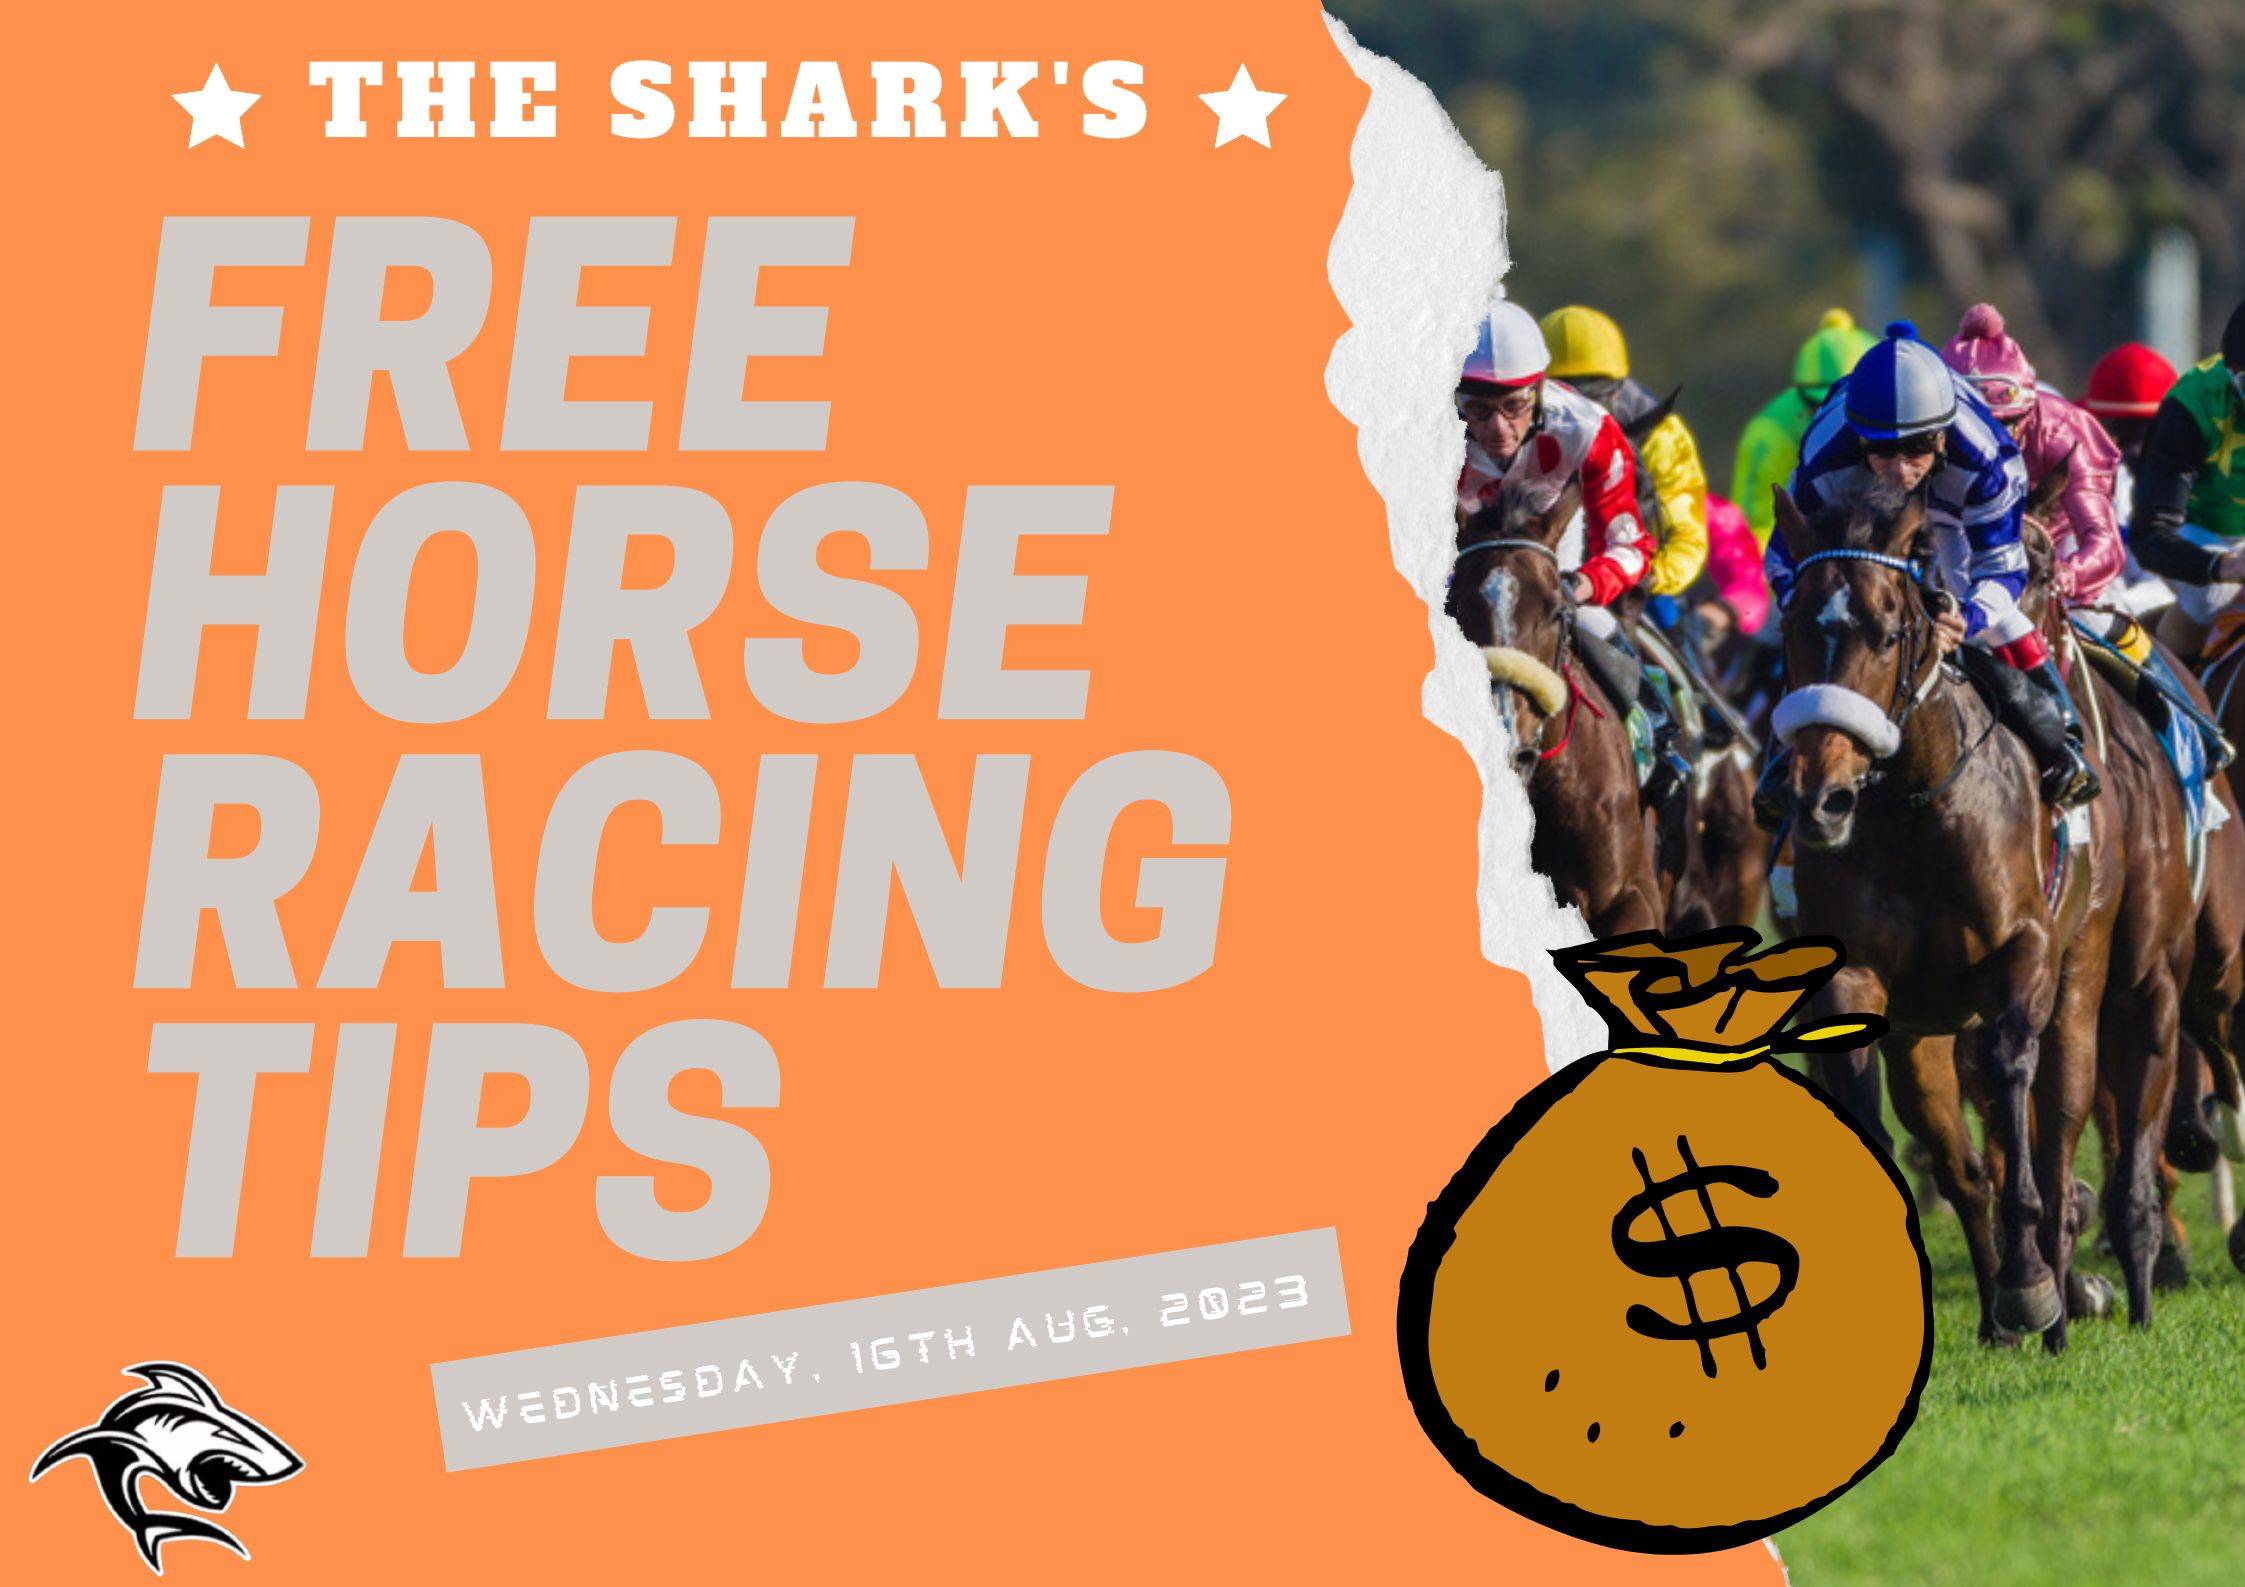 Free Horse Racing Tips - 16th Aug